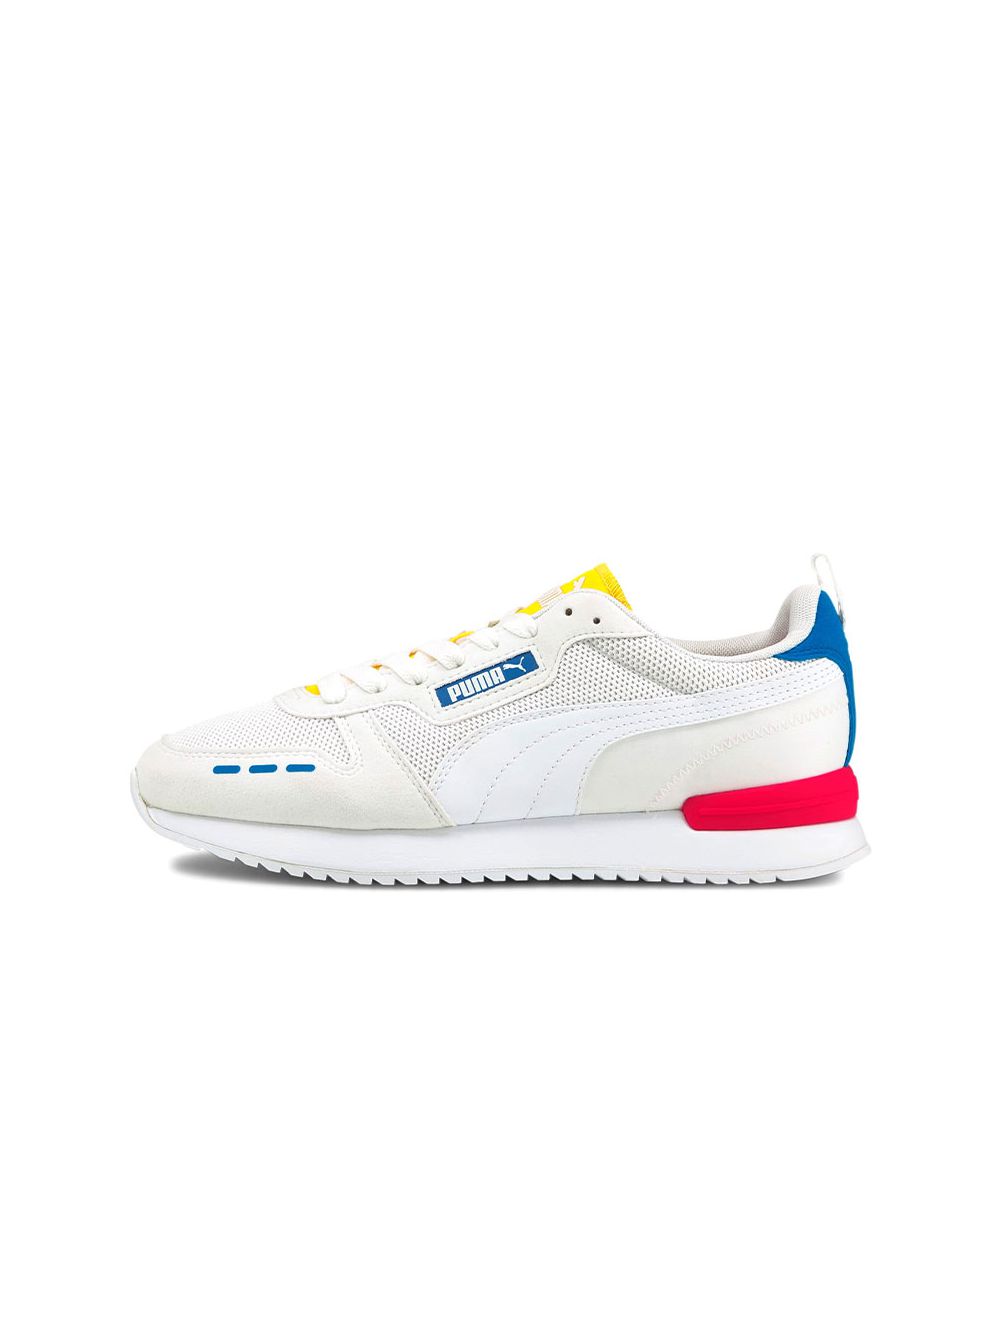 white and blue puma sneakers